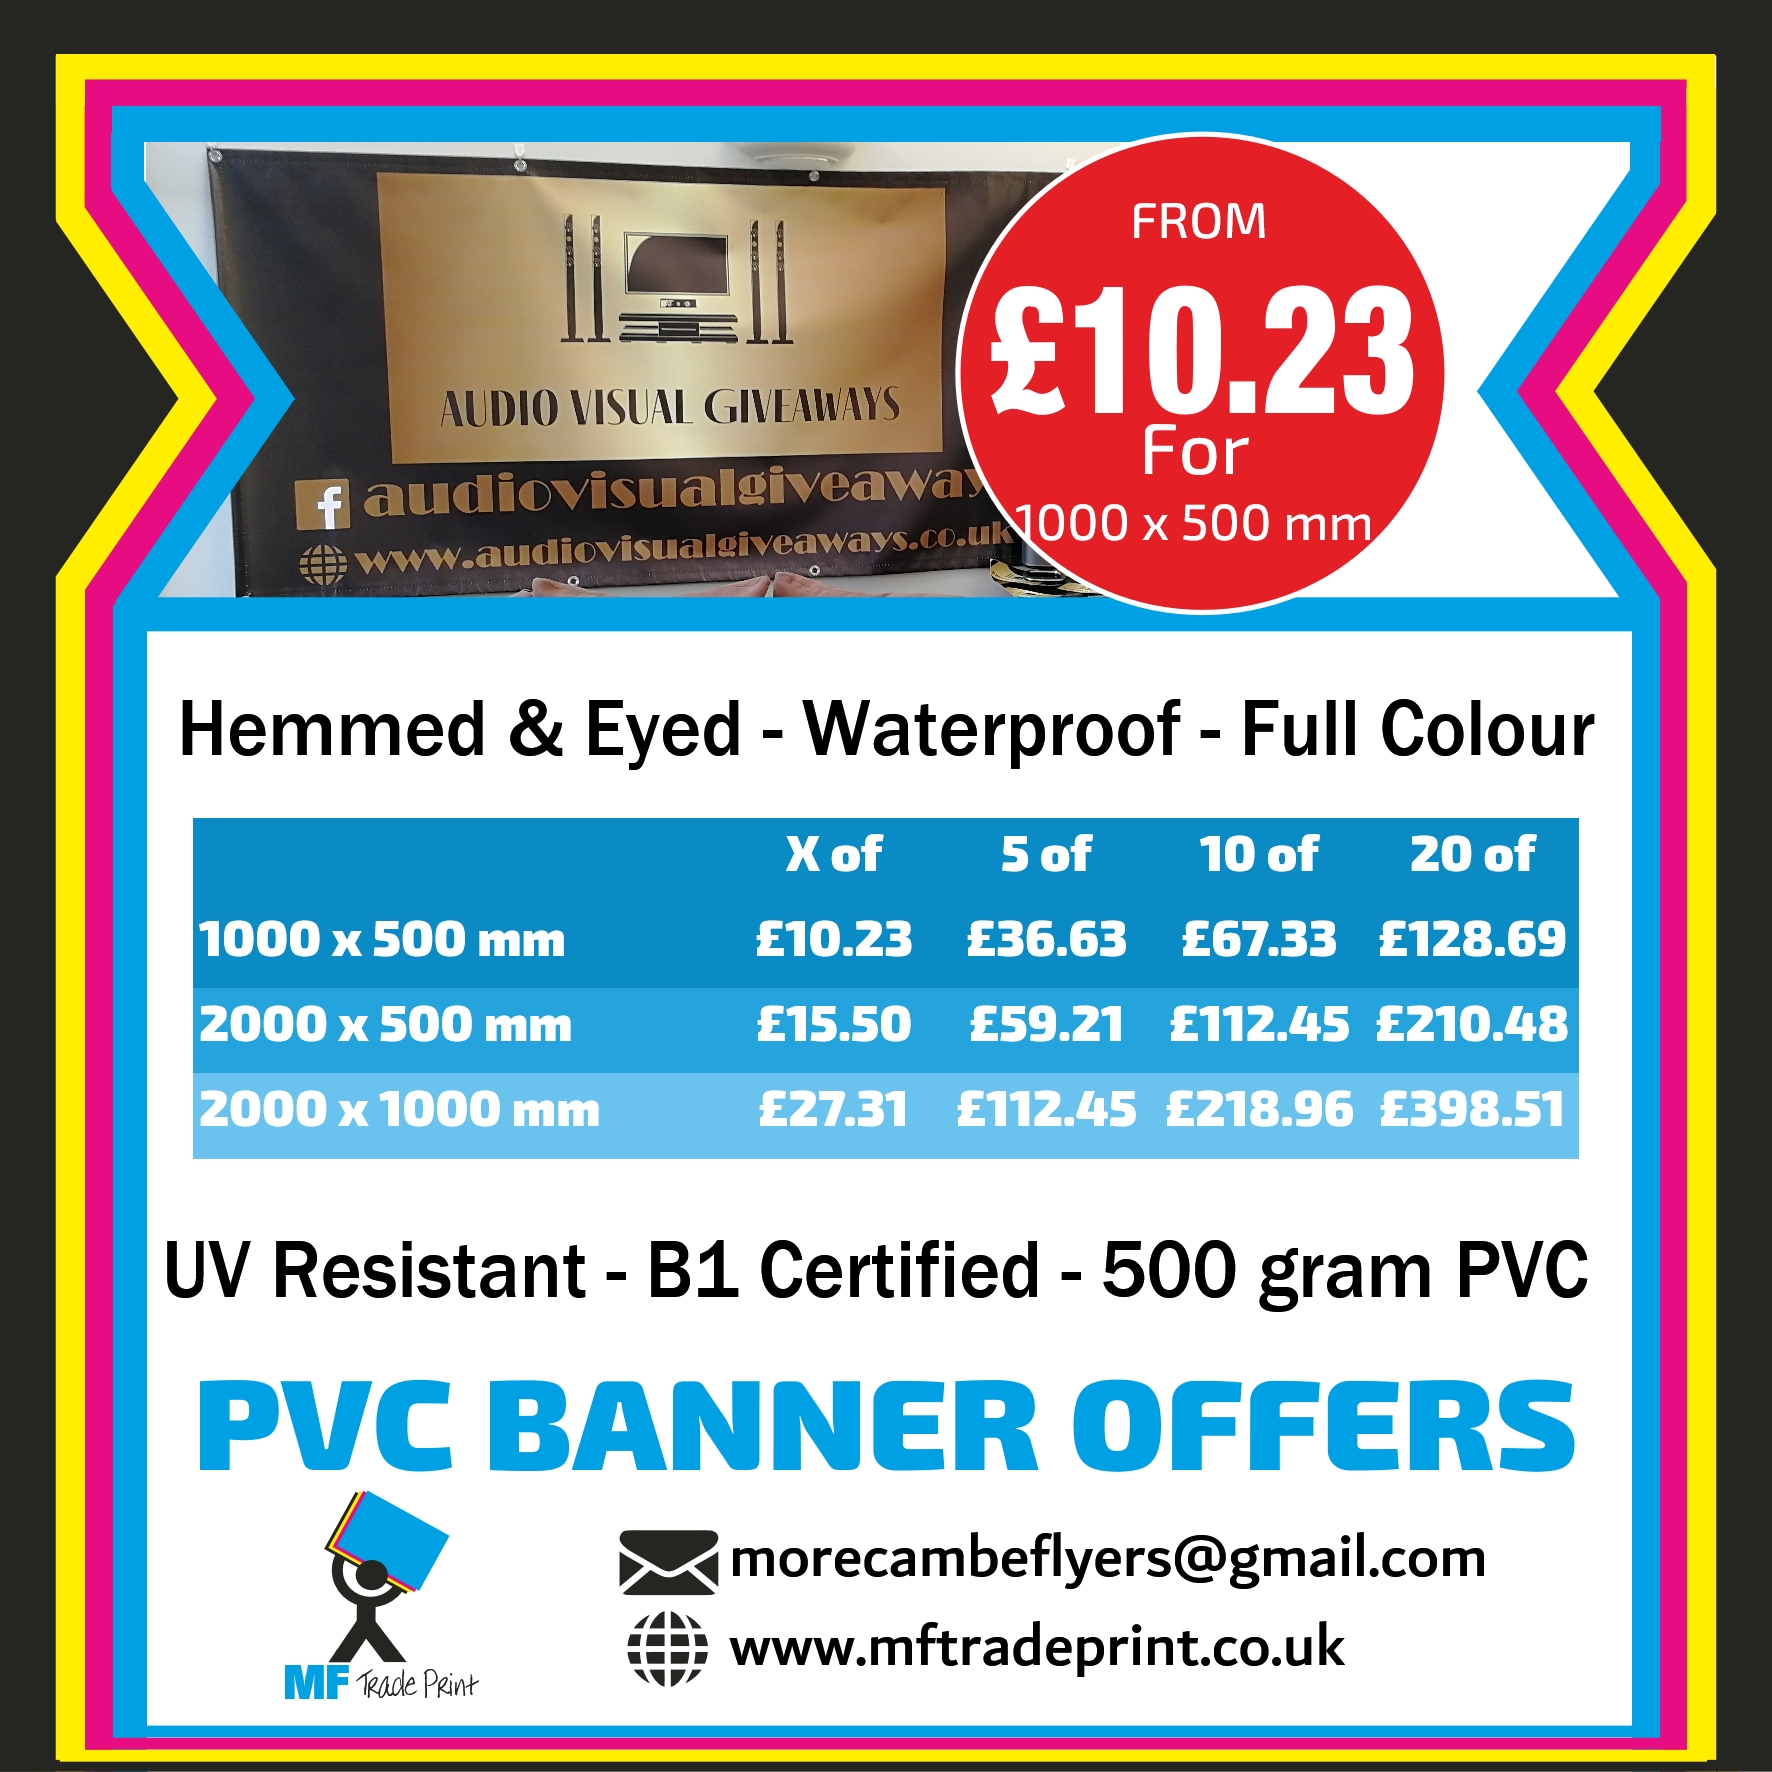 PVC Banners last chance offer